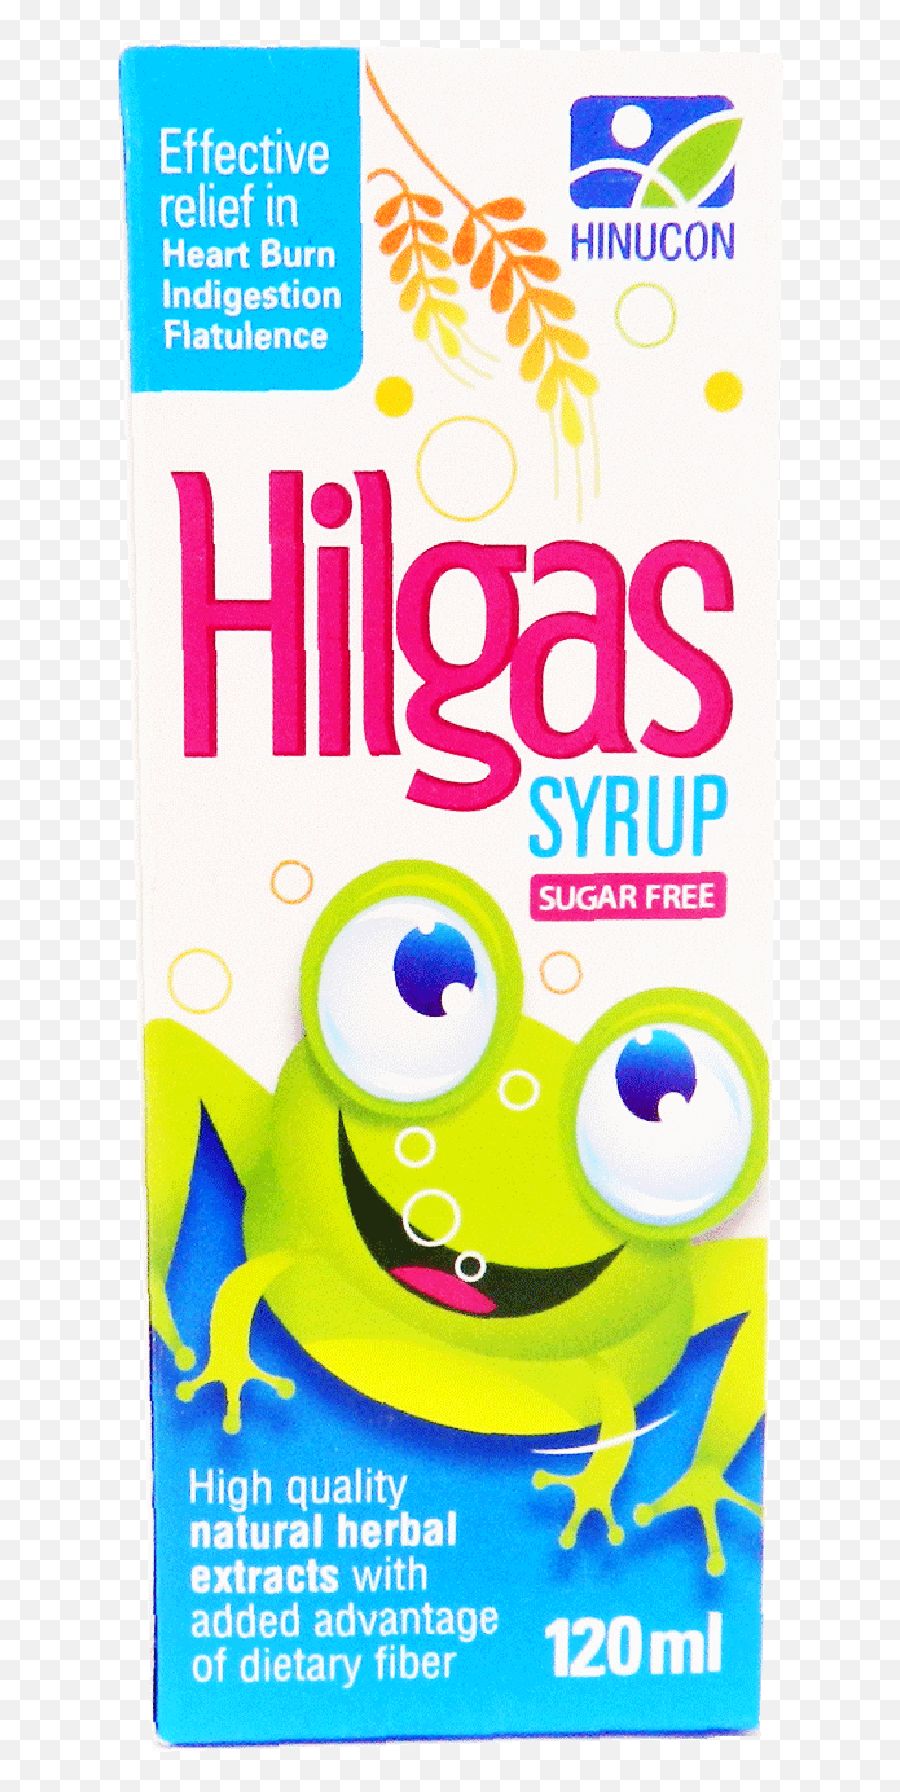 Hilgas Syp 120ml Side Effects Price Use Buy Online - Hilgas Syrup Emoji,Relief Emoticon